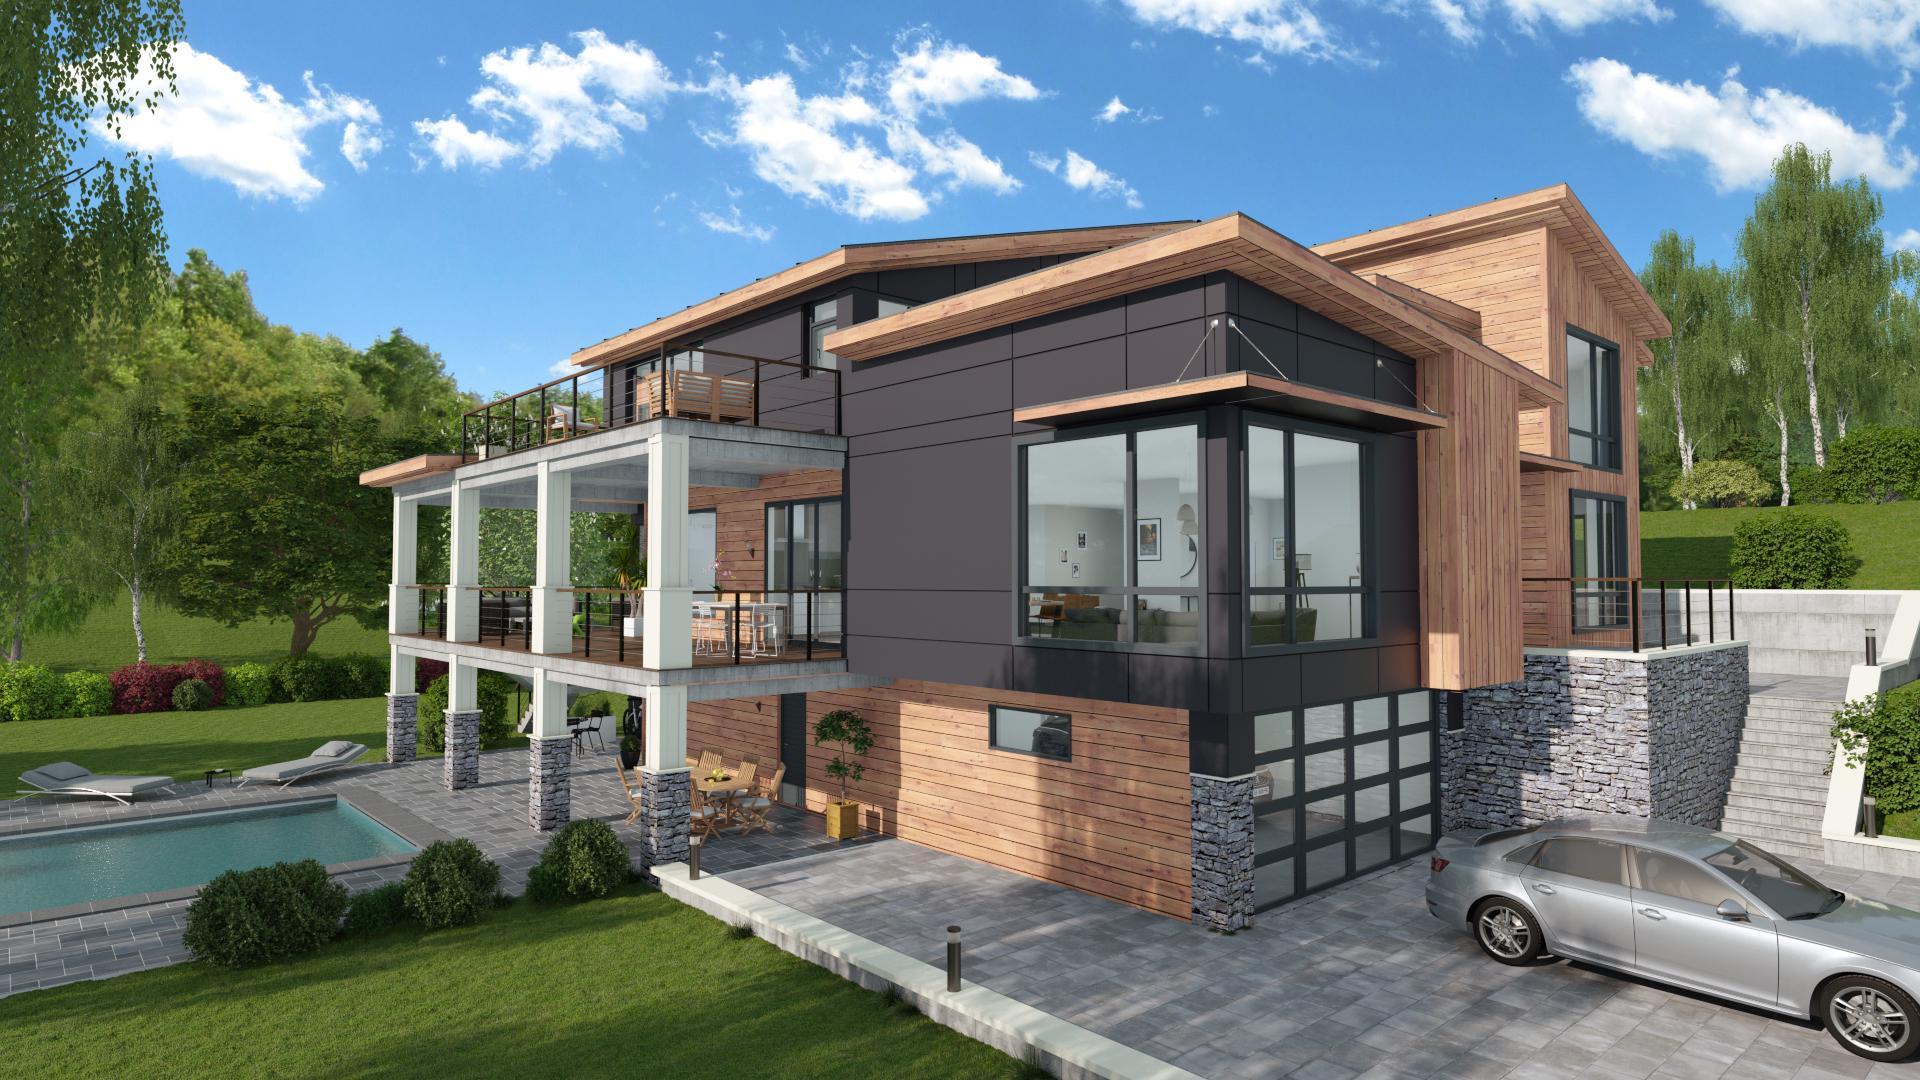 Review Cedreo: The only 3D home design software to draw houses in 2 hours - Appvizer